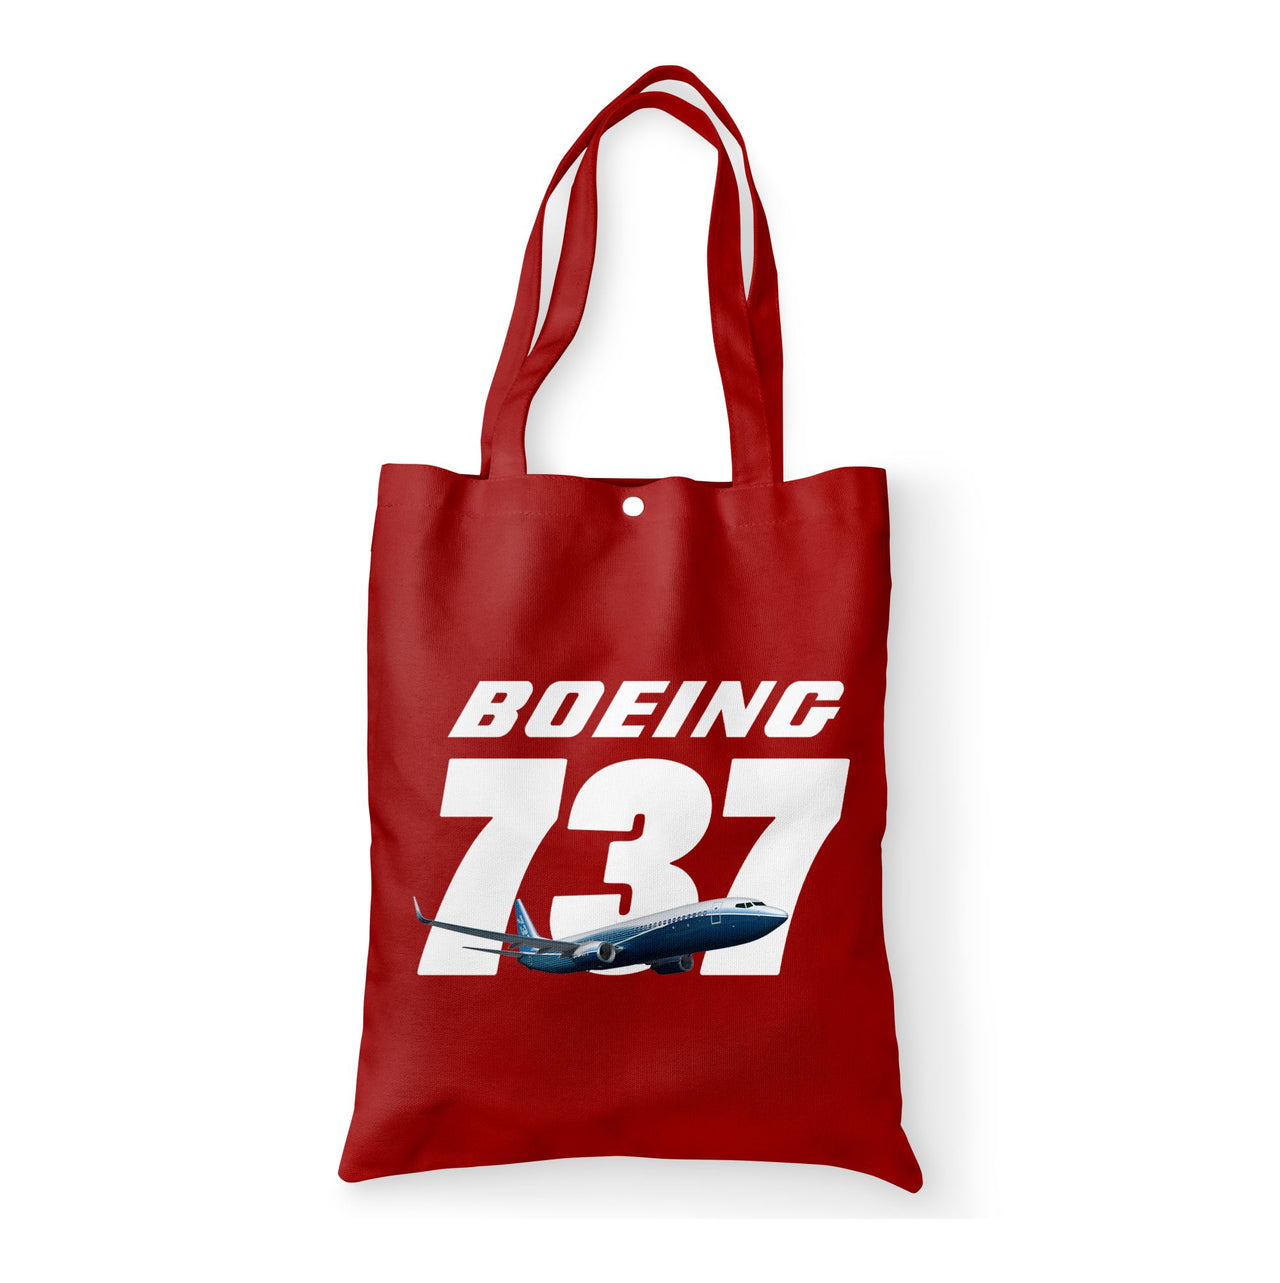 Super Boeing 737+Text Designed Tote Bags